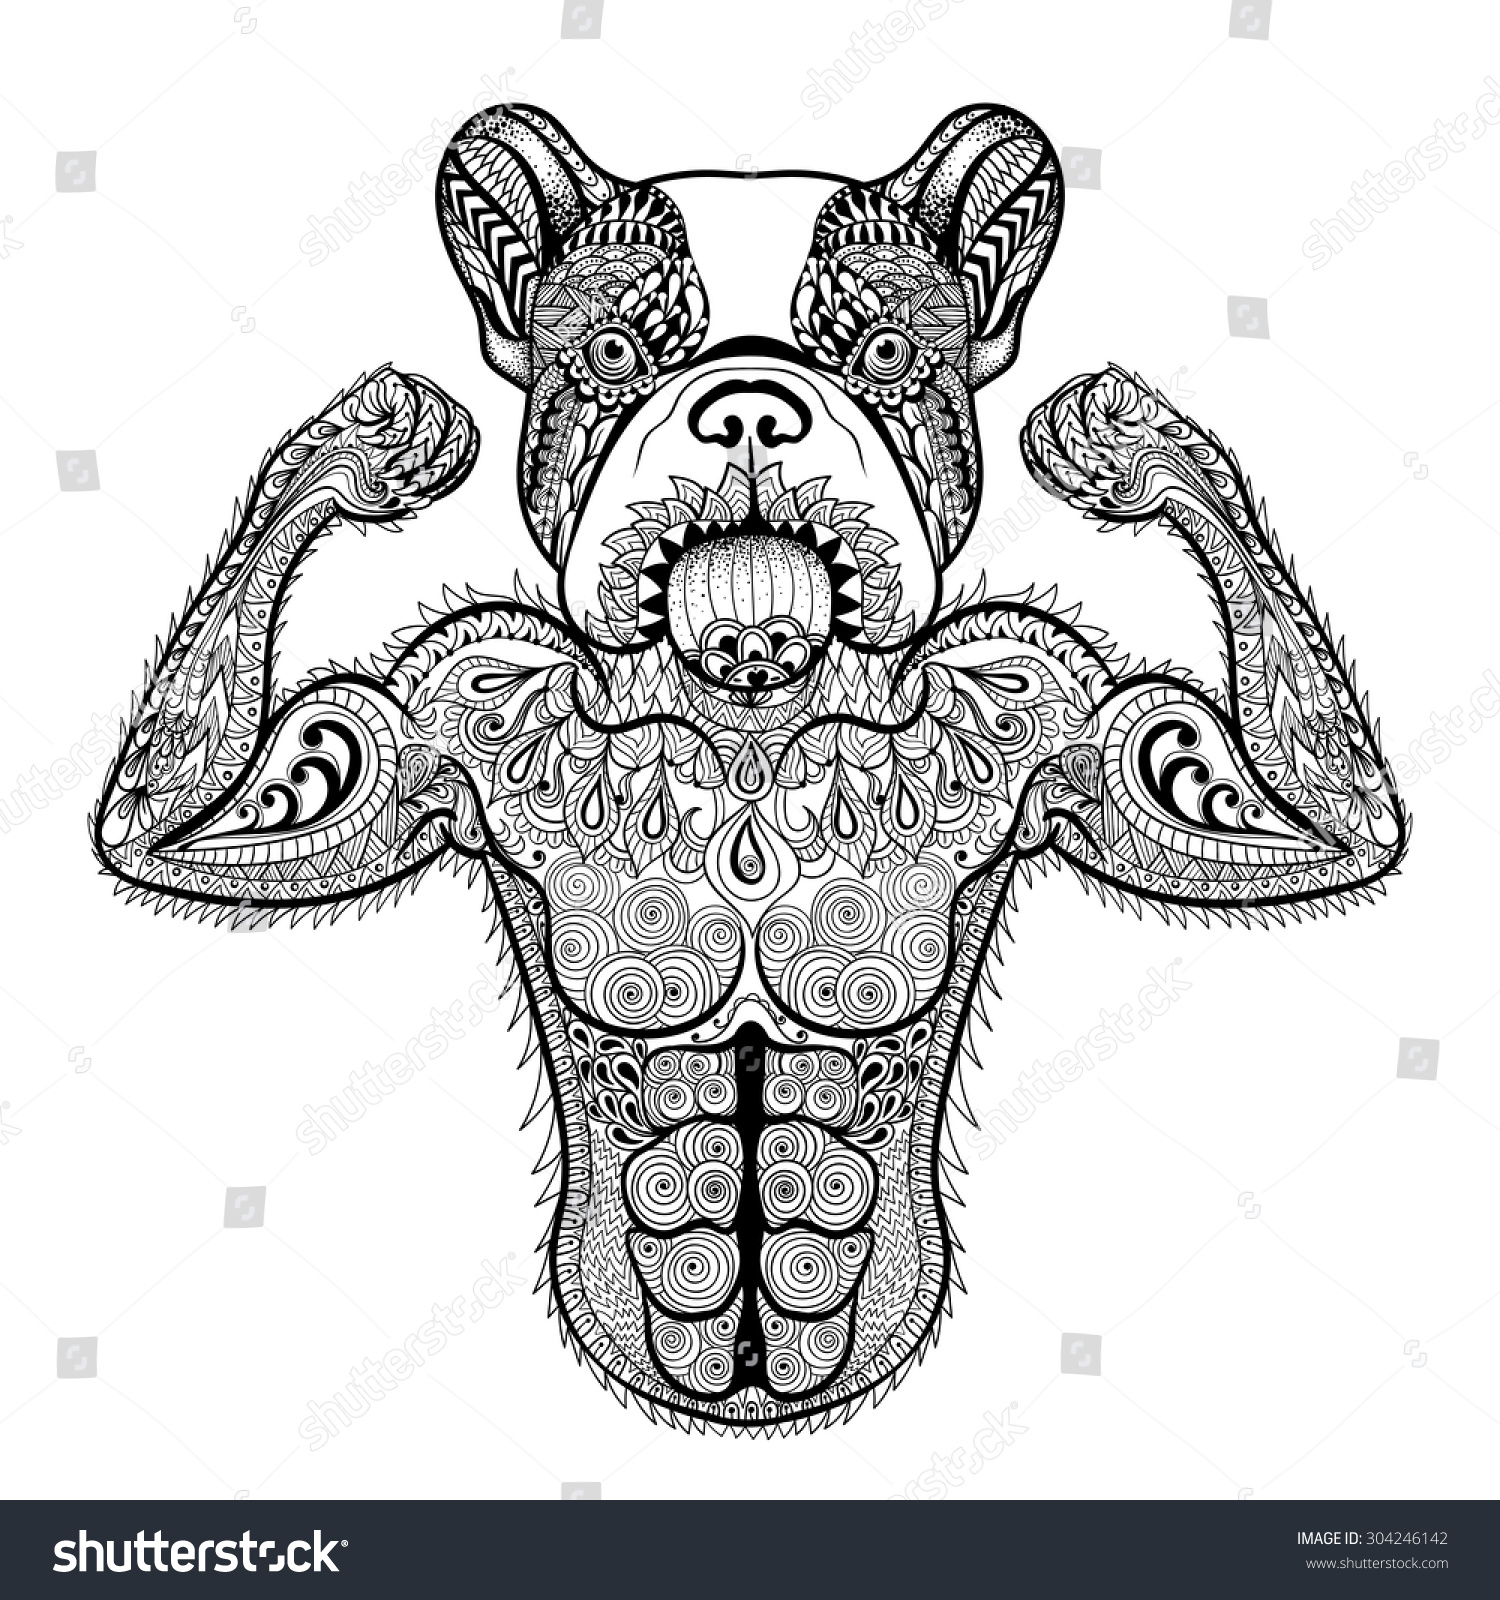 Image Result For French Bulldog Zentangle